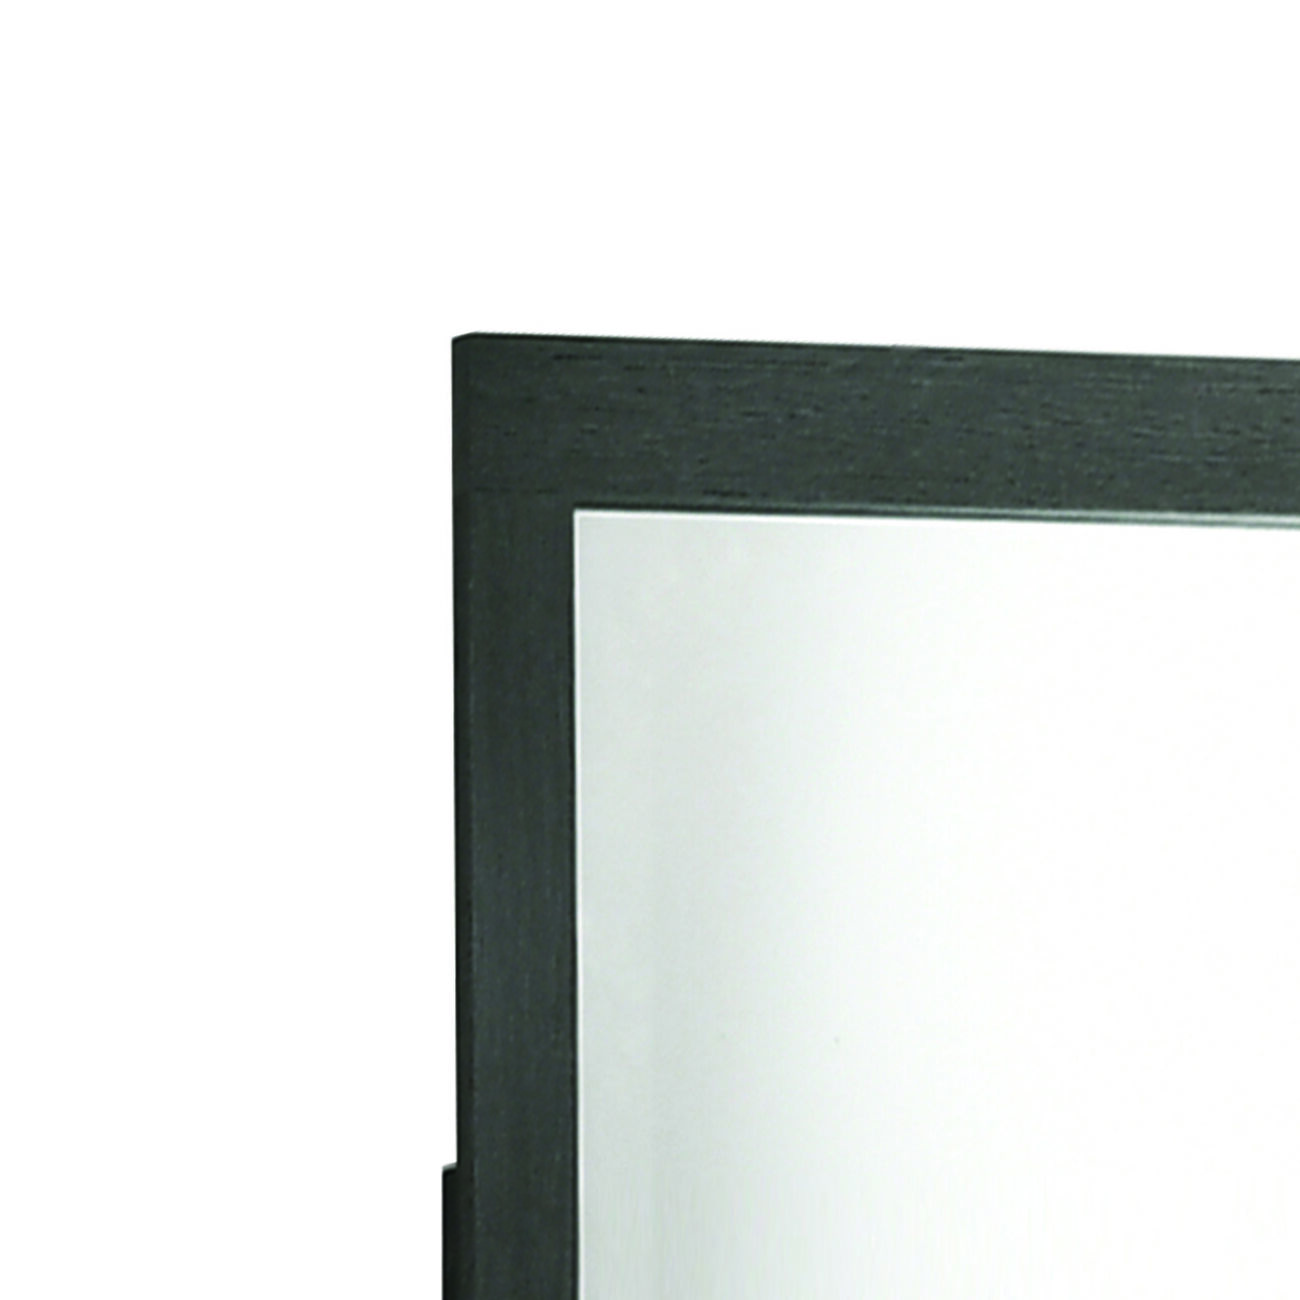 Rectangular Wooden Framed Mirror with Beveled Edge, Gray and Silver